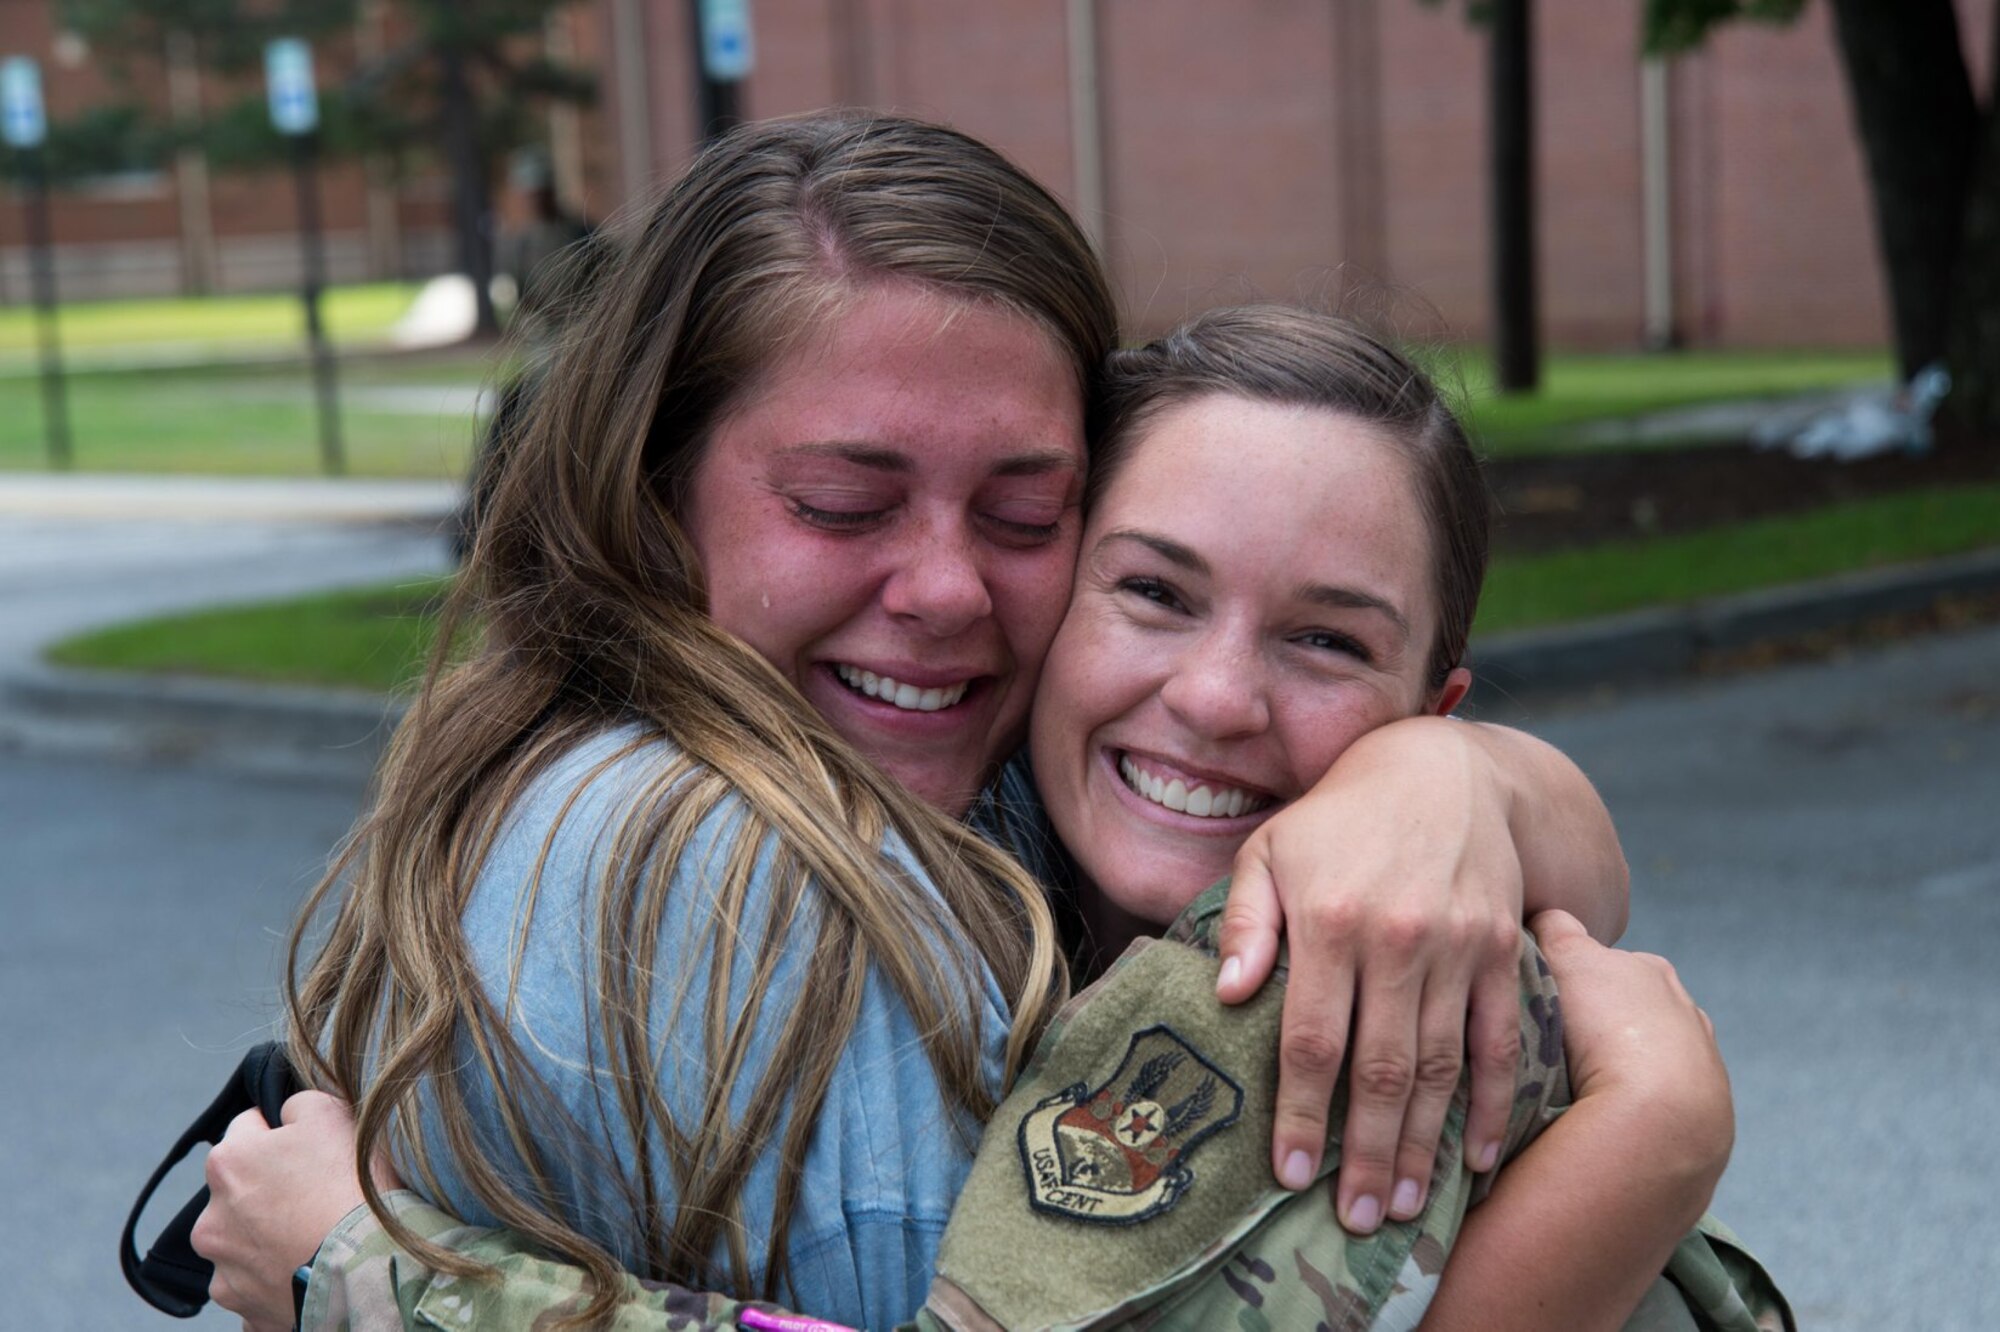 A service member embraces a family member.